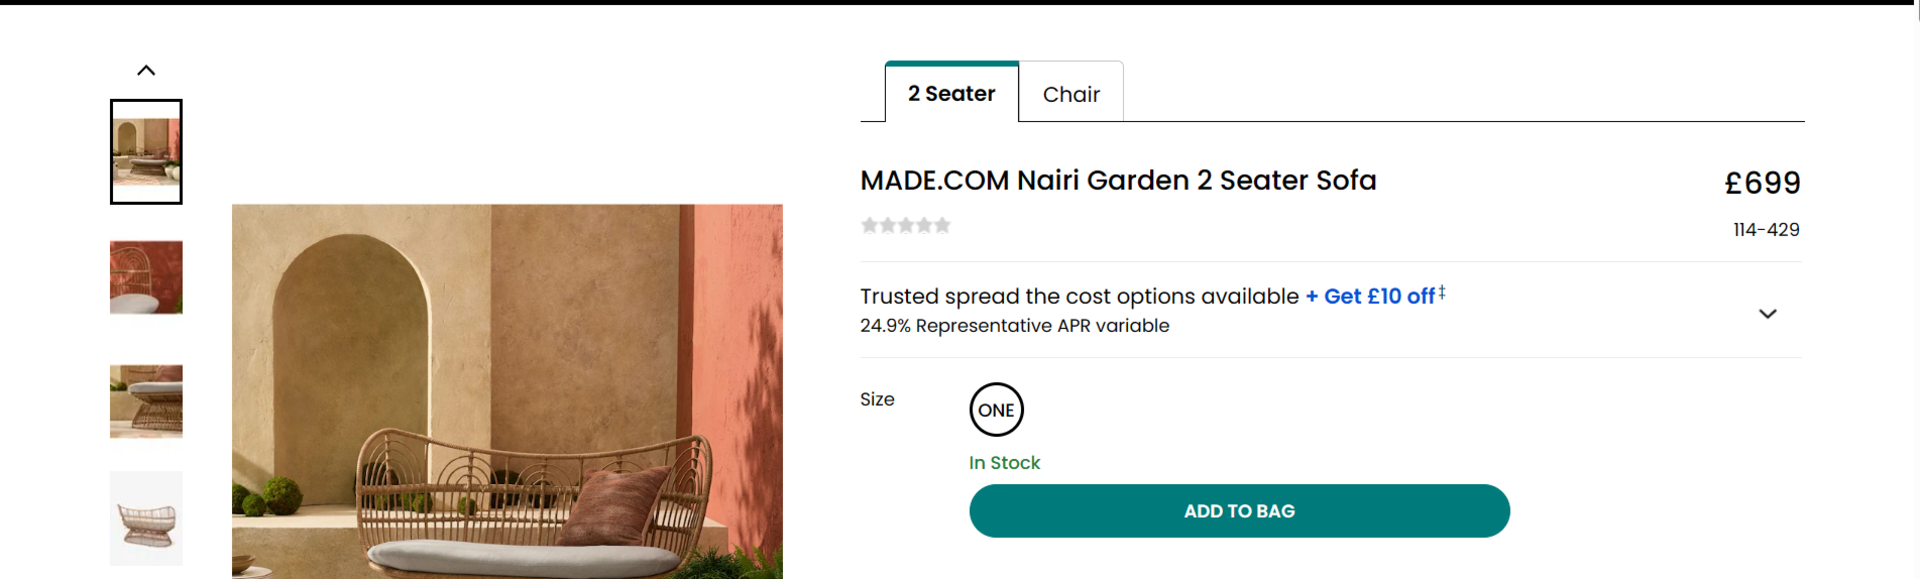 Brand New & Boxed MADE.COM Nairi Garden 2 Seater Sofa. RRP £699.00. Made from decorative natural - Image 7 of 7